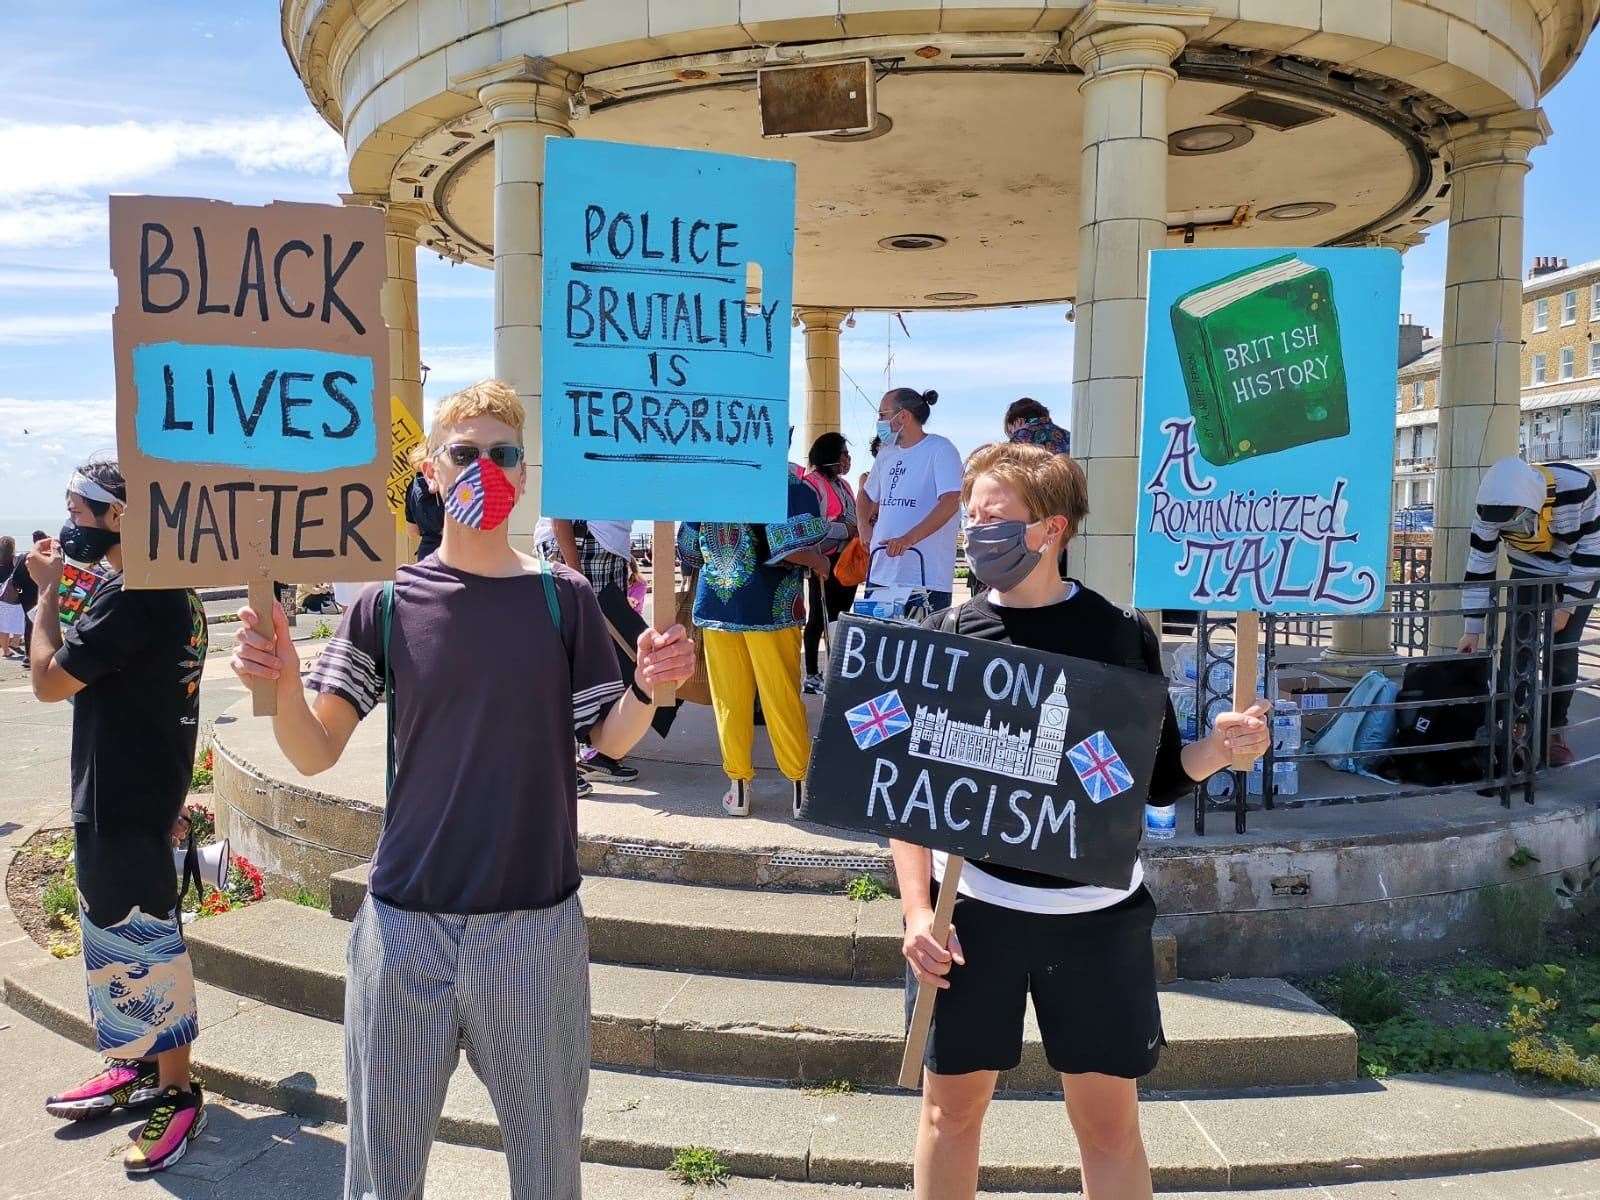 Black Lives Matter protesters in Thanet last month. Picture: People Dem Collective